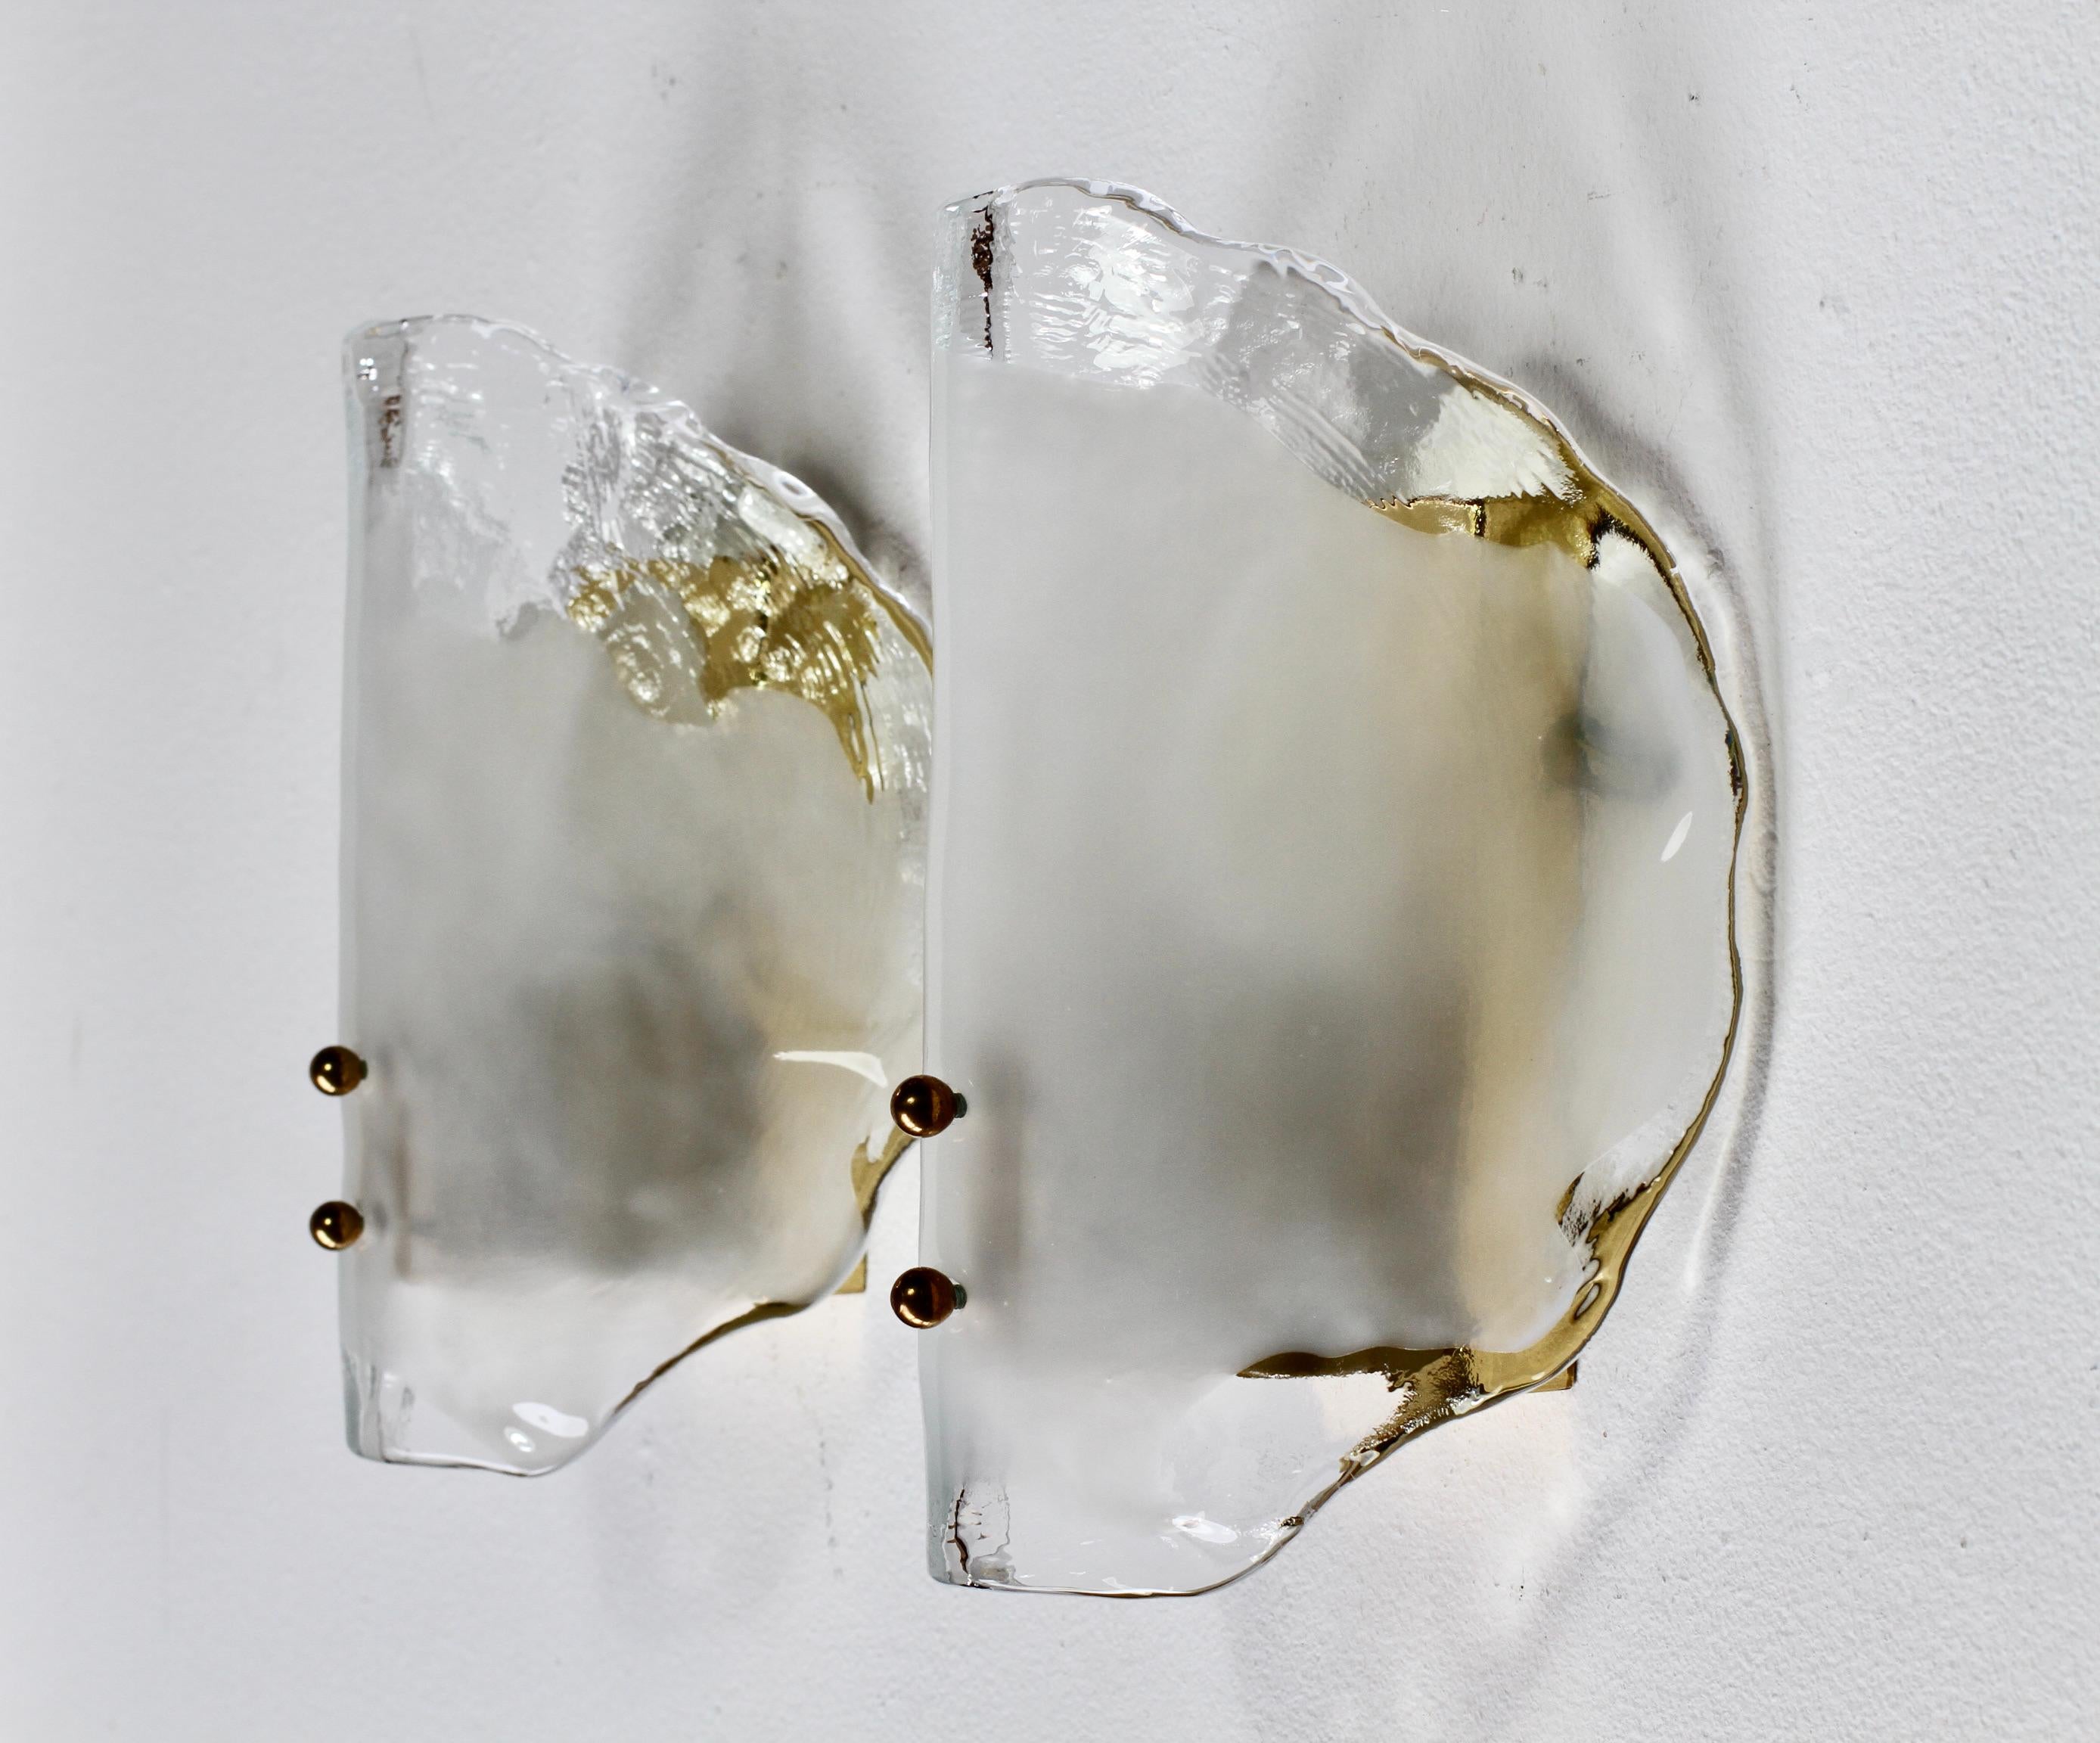 Midcentury Pair of Kalmar Mazzega Murano Glass Wall Lights or Sconces, 1970s For Sale 1